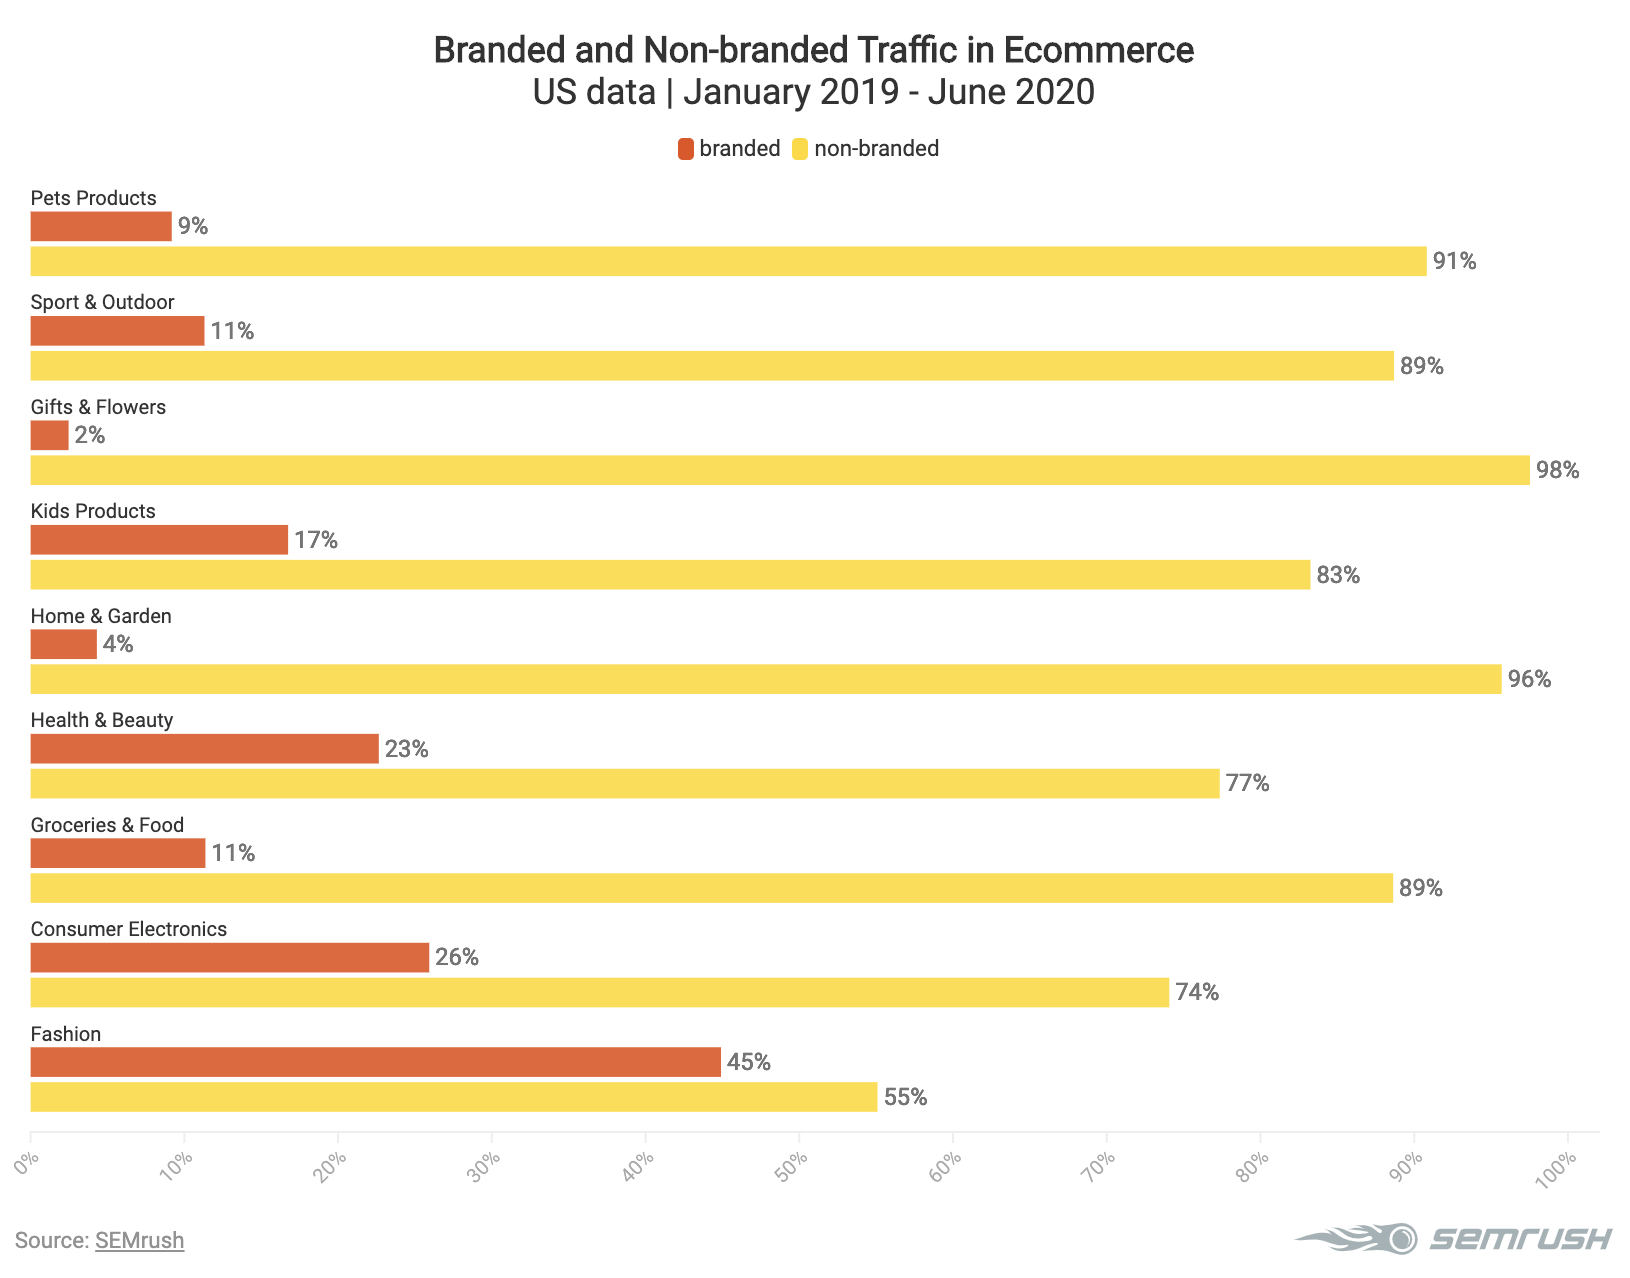 Branded and non-branded traffic in different ecommerce categories